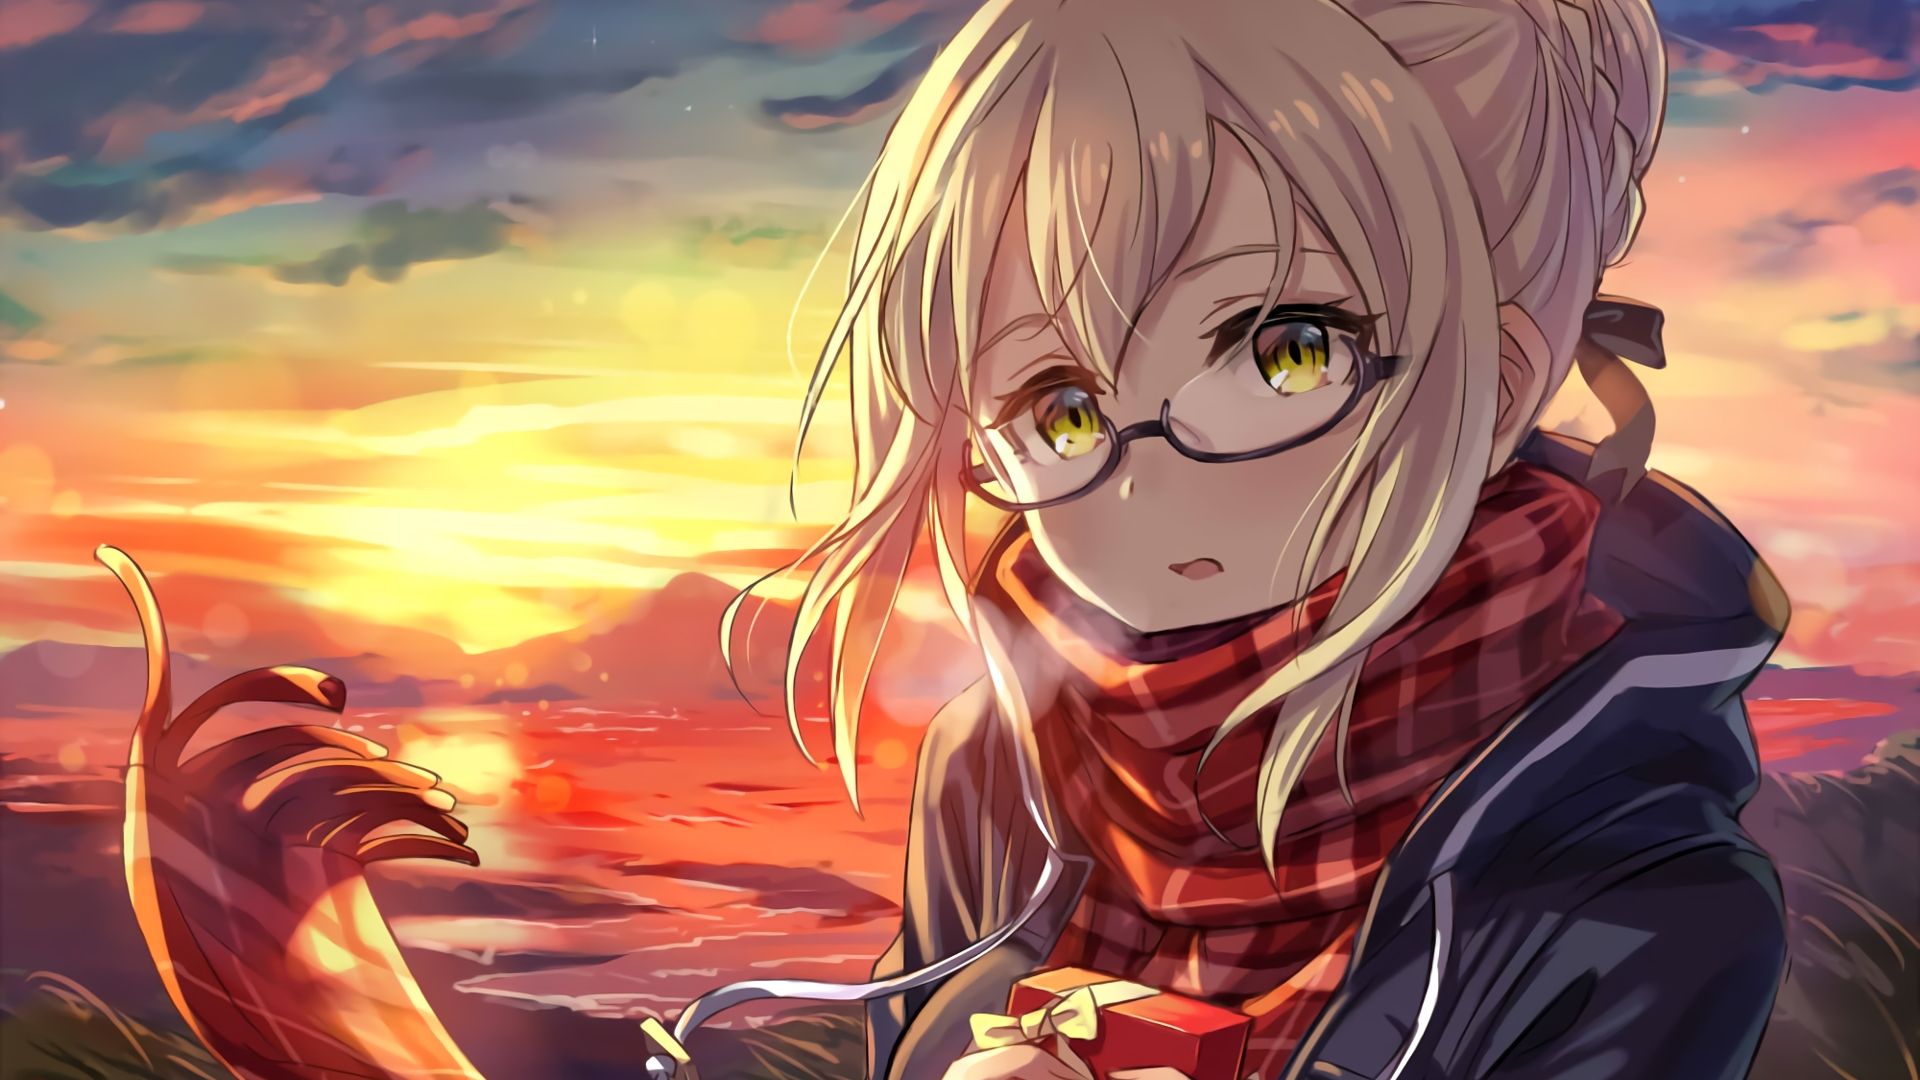 Desktop Wallpaper Saber, Fate/Stay Night, Anime Girl, Hd Image, Picture,  Background, 9yyjhz